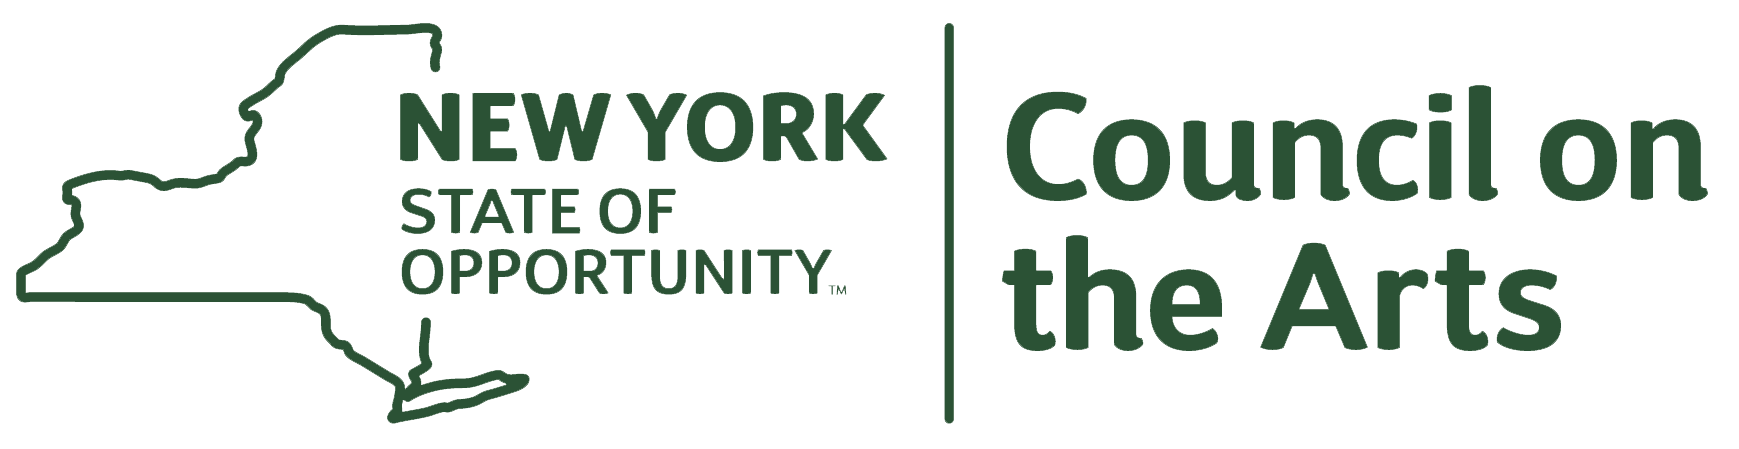 The New York State Council on the Arts logo including the outline of the state and the name of the organization in green